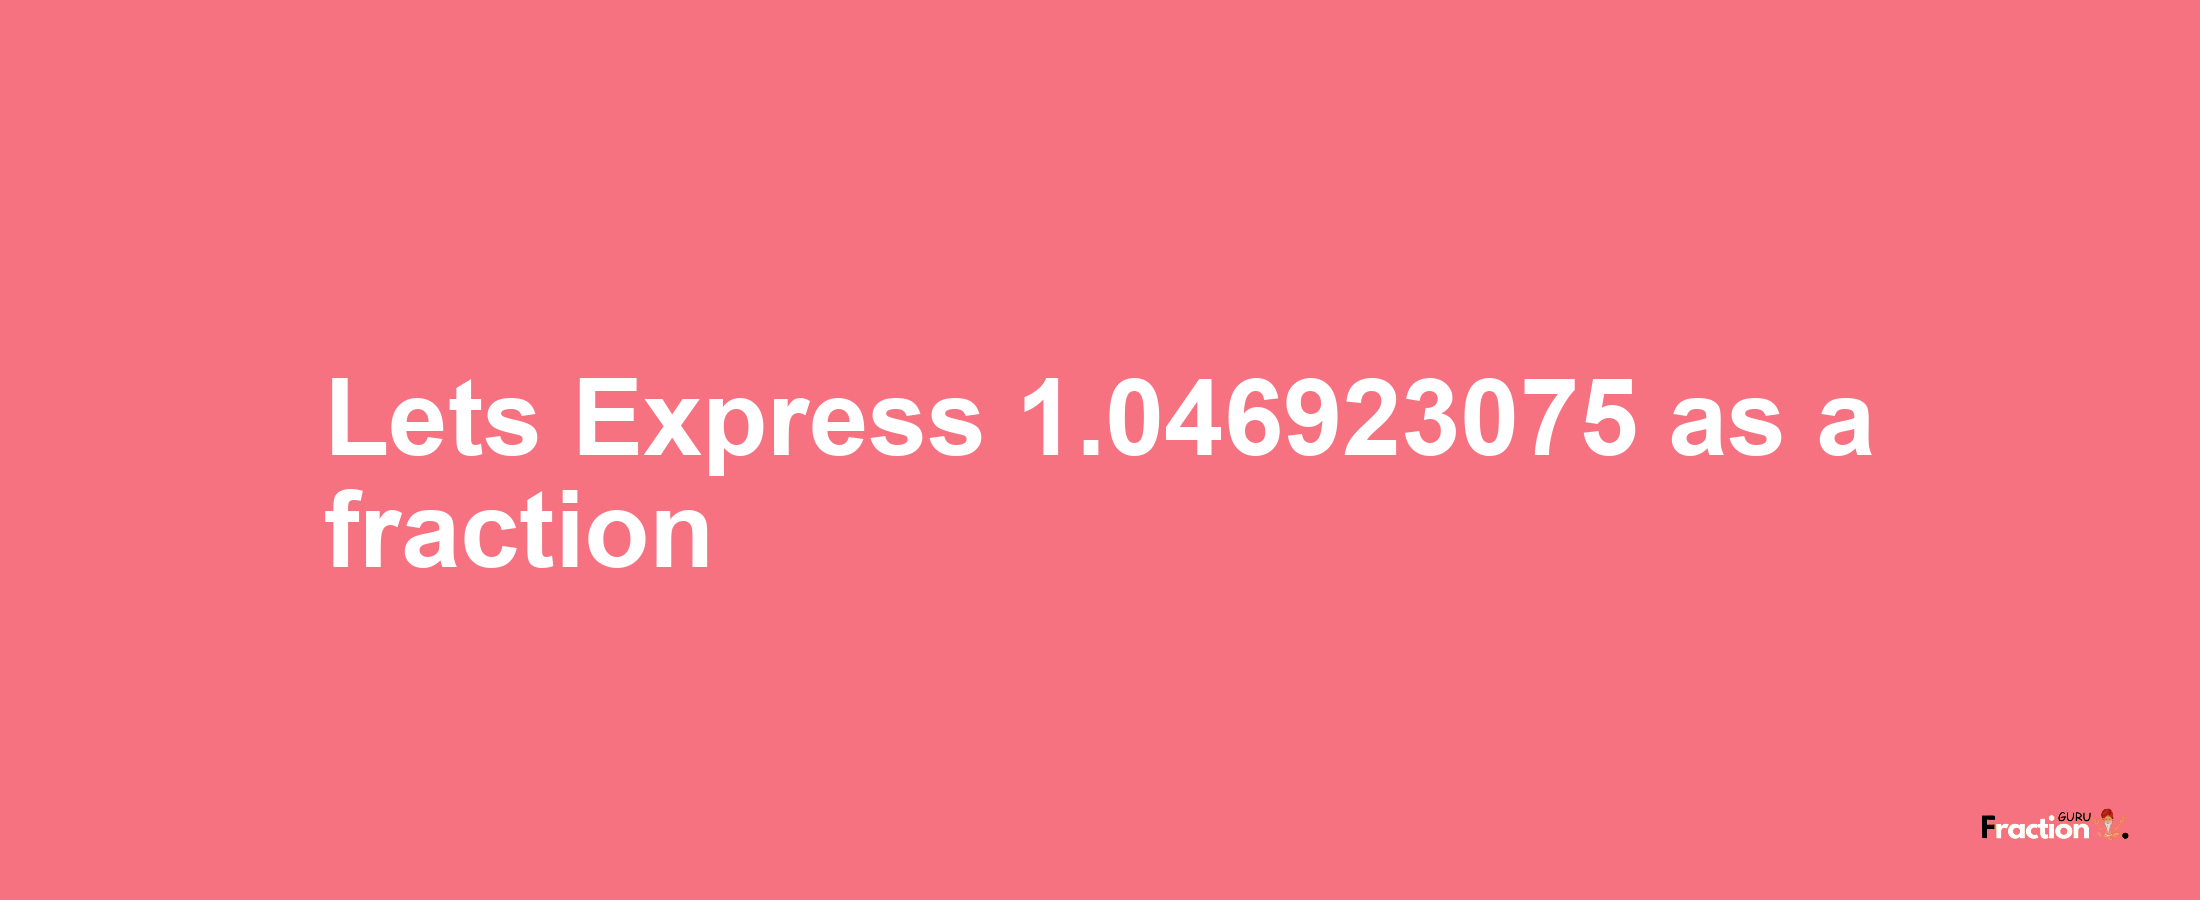 Lets Express 1.046923075 as afraction